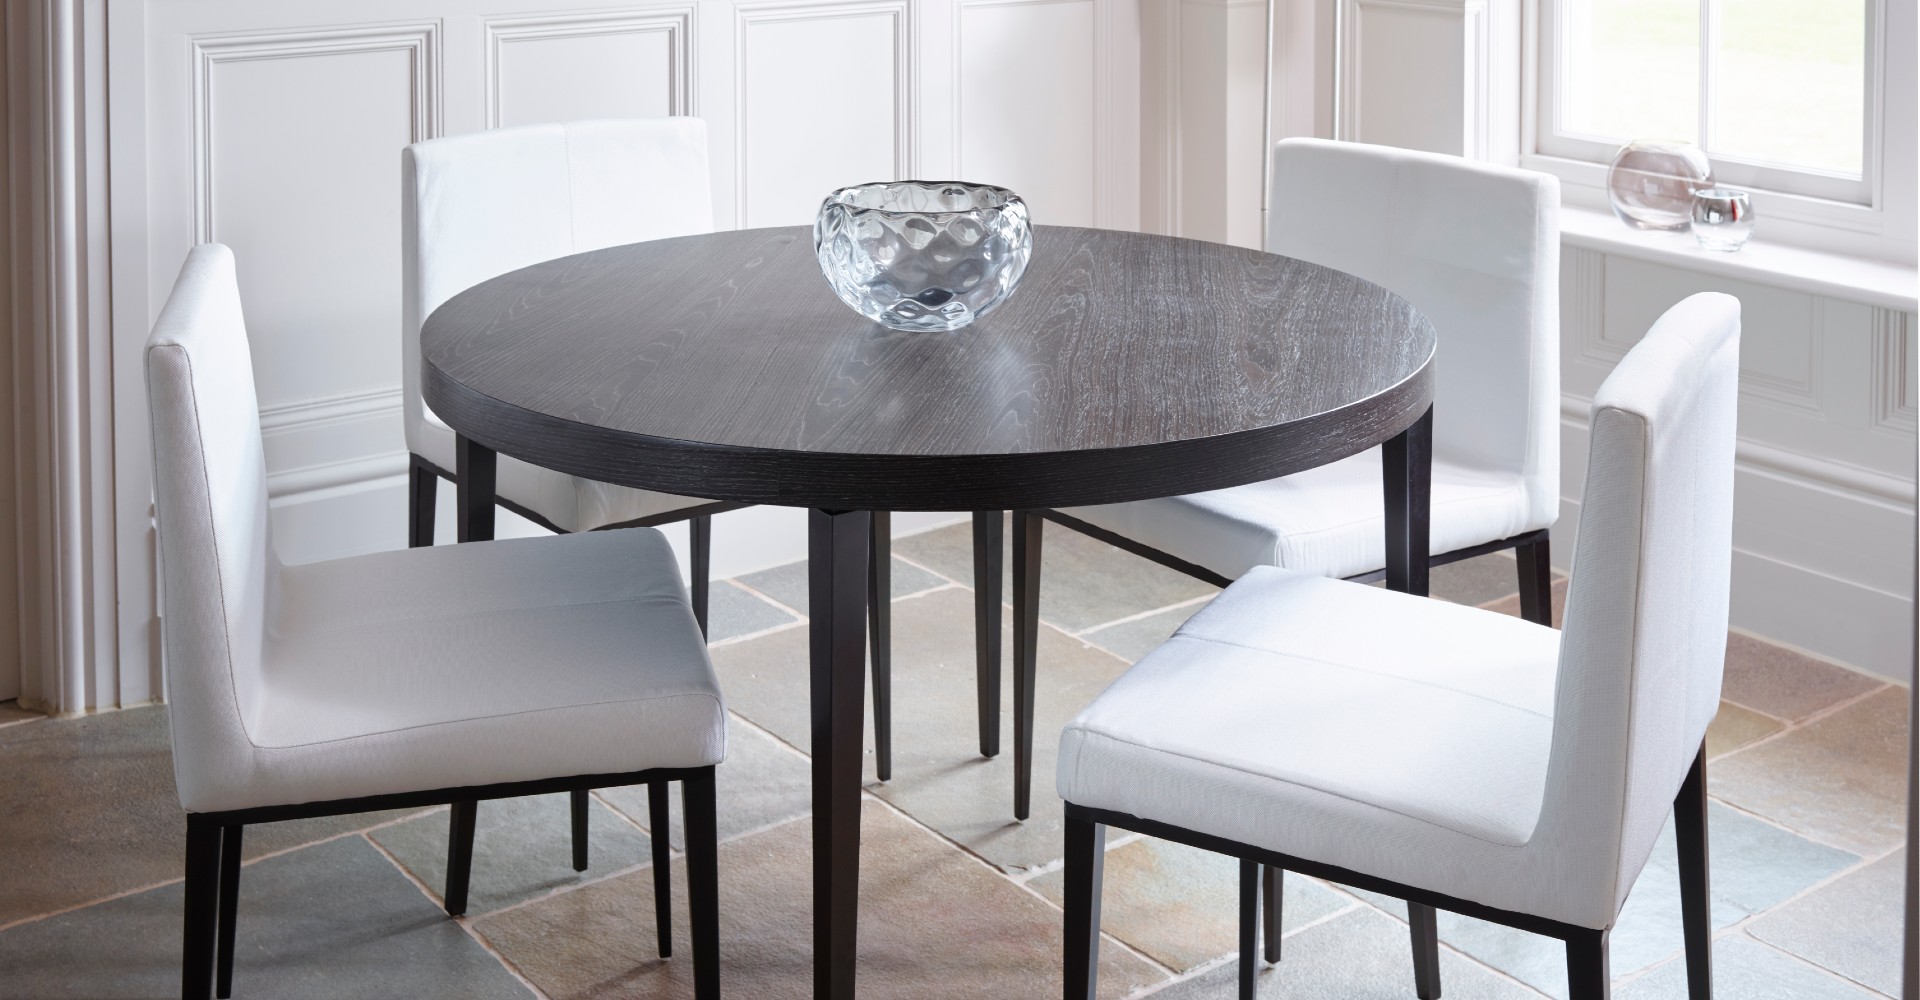 Fitzroy Round Dining Table & Off-White Upholstered Chairs by Gillmore © GillmoreSPACE Ltd